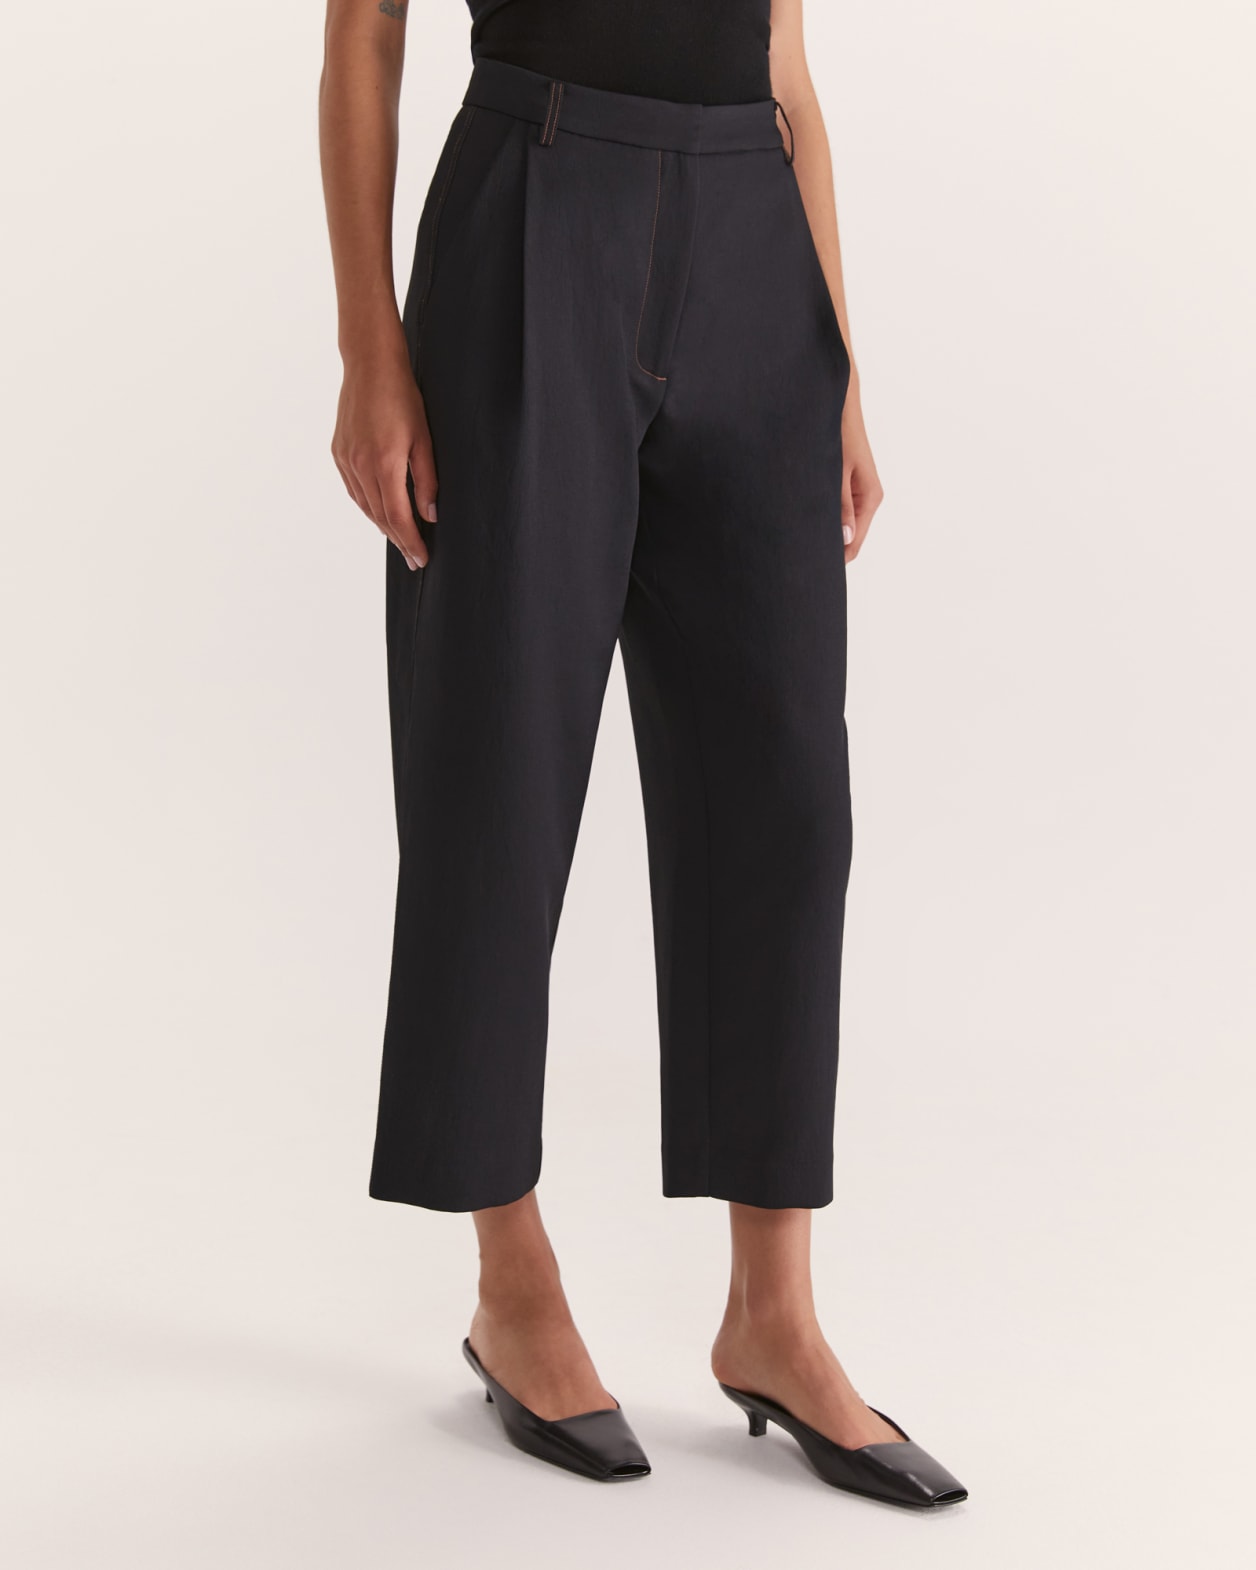 Dharma Tuck Front Culotte in BLACK